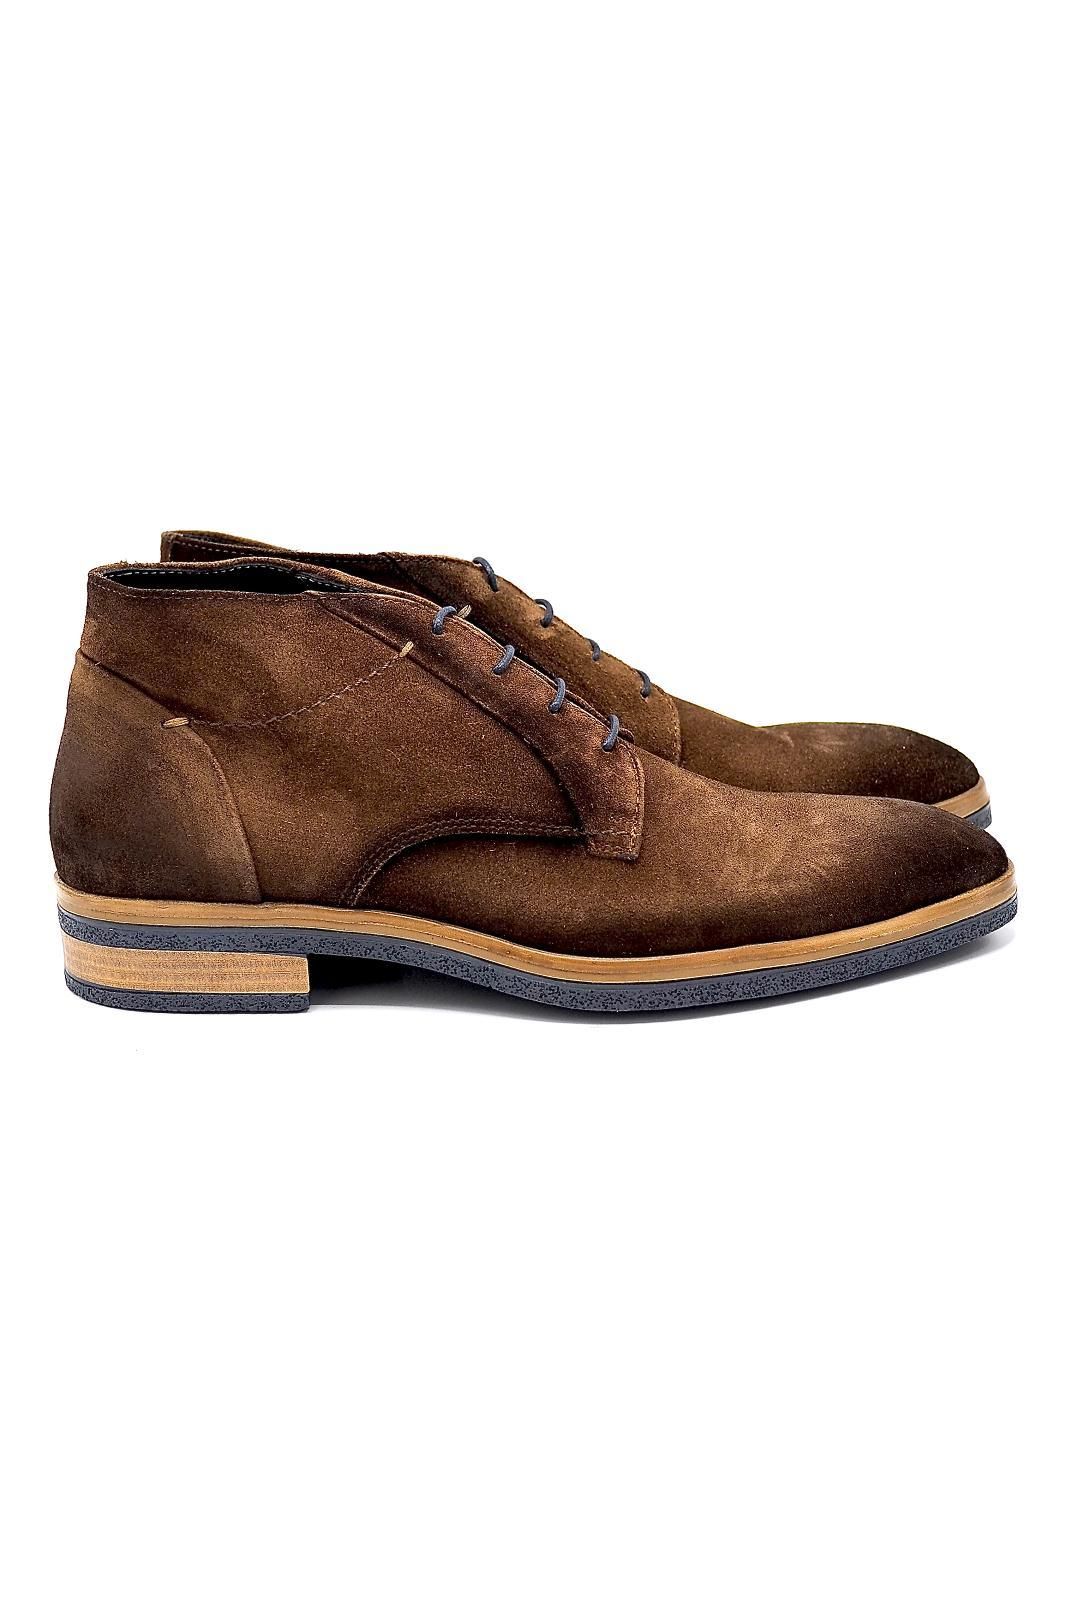 Giorgio 1958 boots Naturel hommes (GG1958-½ boots croute - 73533 ½ boots croute camel) - Marine | Much more than shoes